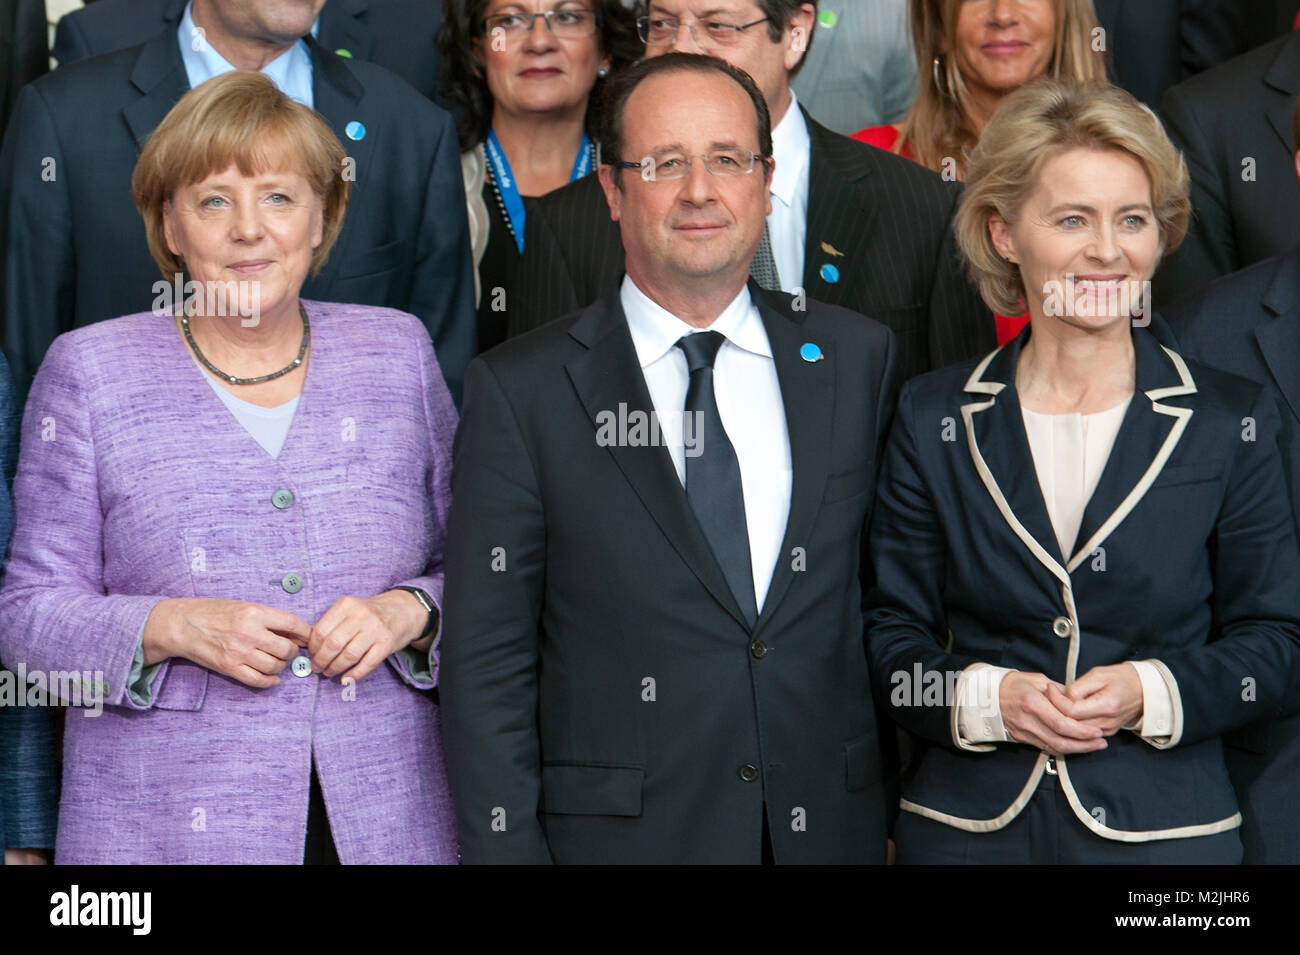 Federal Chancellor Angela Merkel promote the youth employment in Berlin with a conference with all European Heads of Government in focus the Portuguese Prime Minister because of the situation in Portugal. Stock Photo